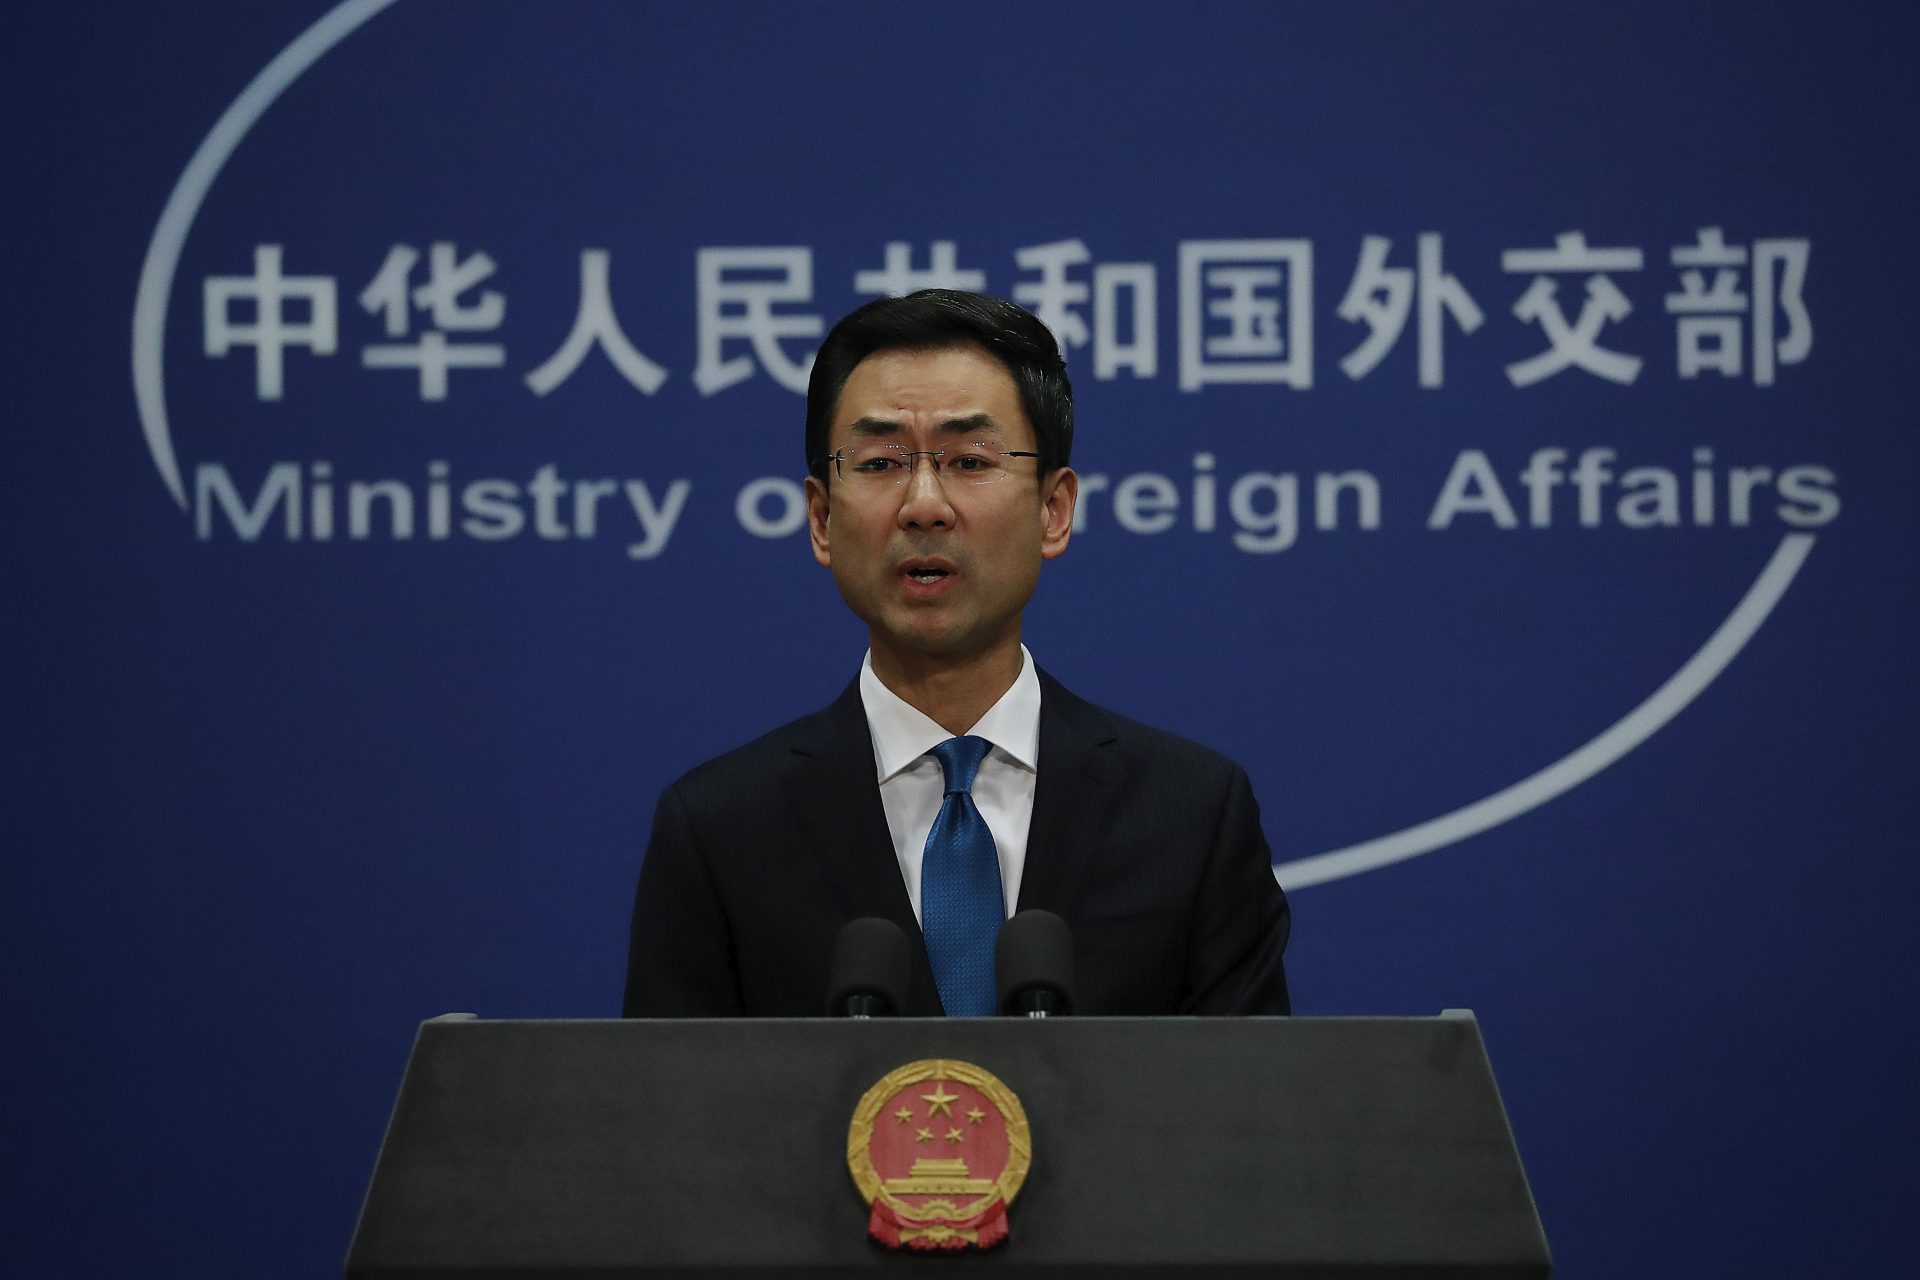 Chinese Foreign Ministry spokesman Geng Shuang speaks during a daily briefing at the Ministry of Foreign Affairs office in Beijing, Thursday, Nov. 28, 2019. China said the implementation of U.S. bills on Hong Kong human rights will undermine the two countries' "cooperation in important areas. Geng Shuang made the remarks at a press briefing on Thursday in response to a question about whether President Donald Trump's signing of the legislation will impact ongoing trade talks.